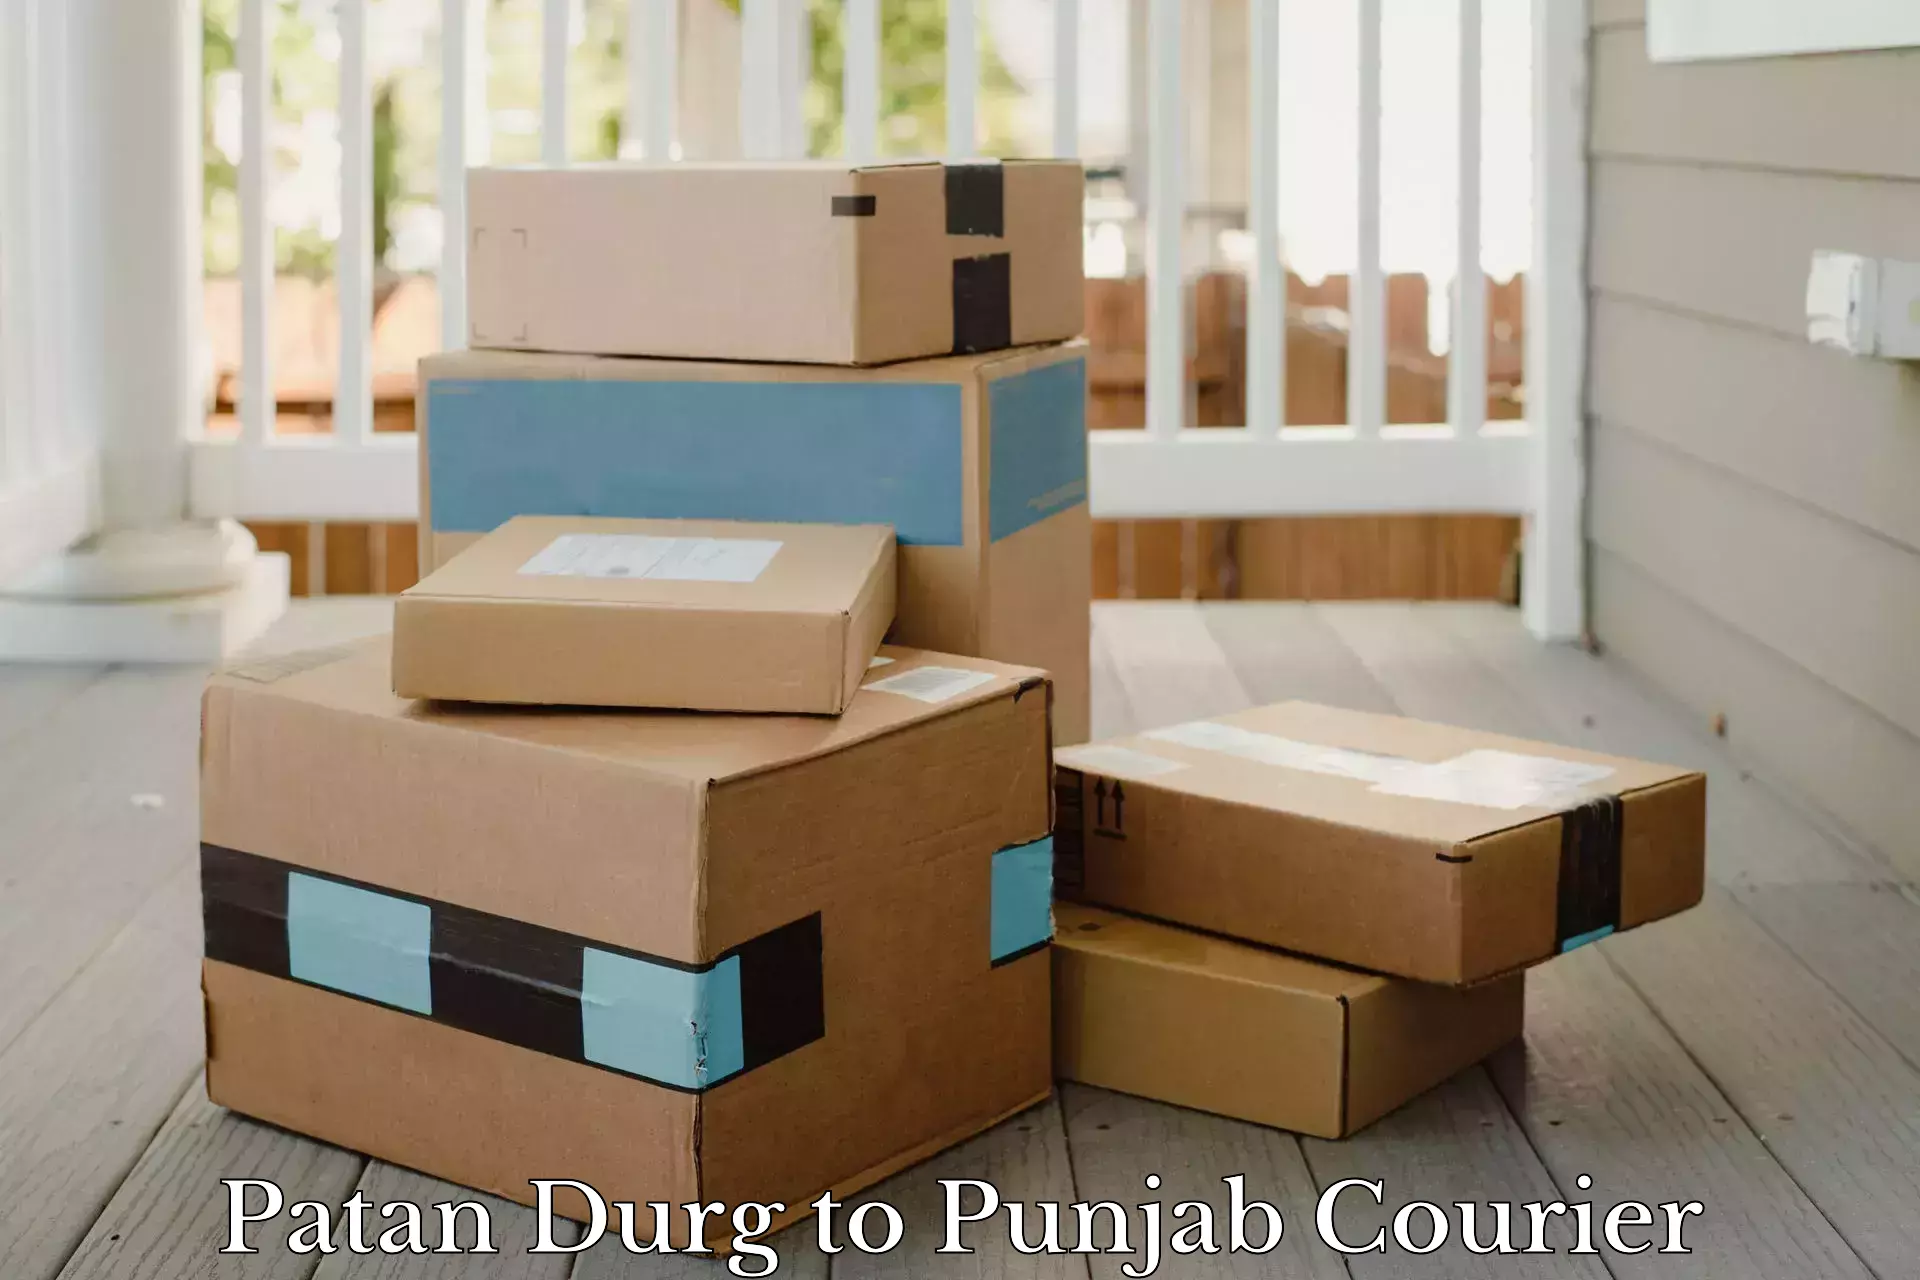 Subscription-based courier Patan Durg to Punjab